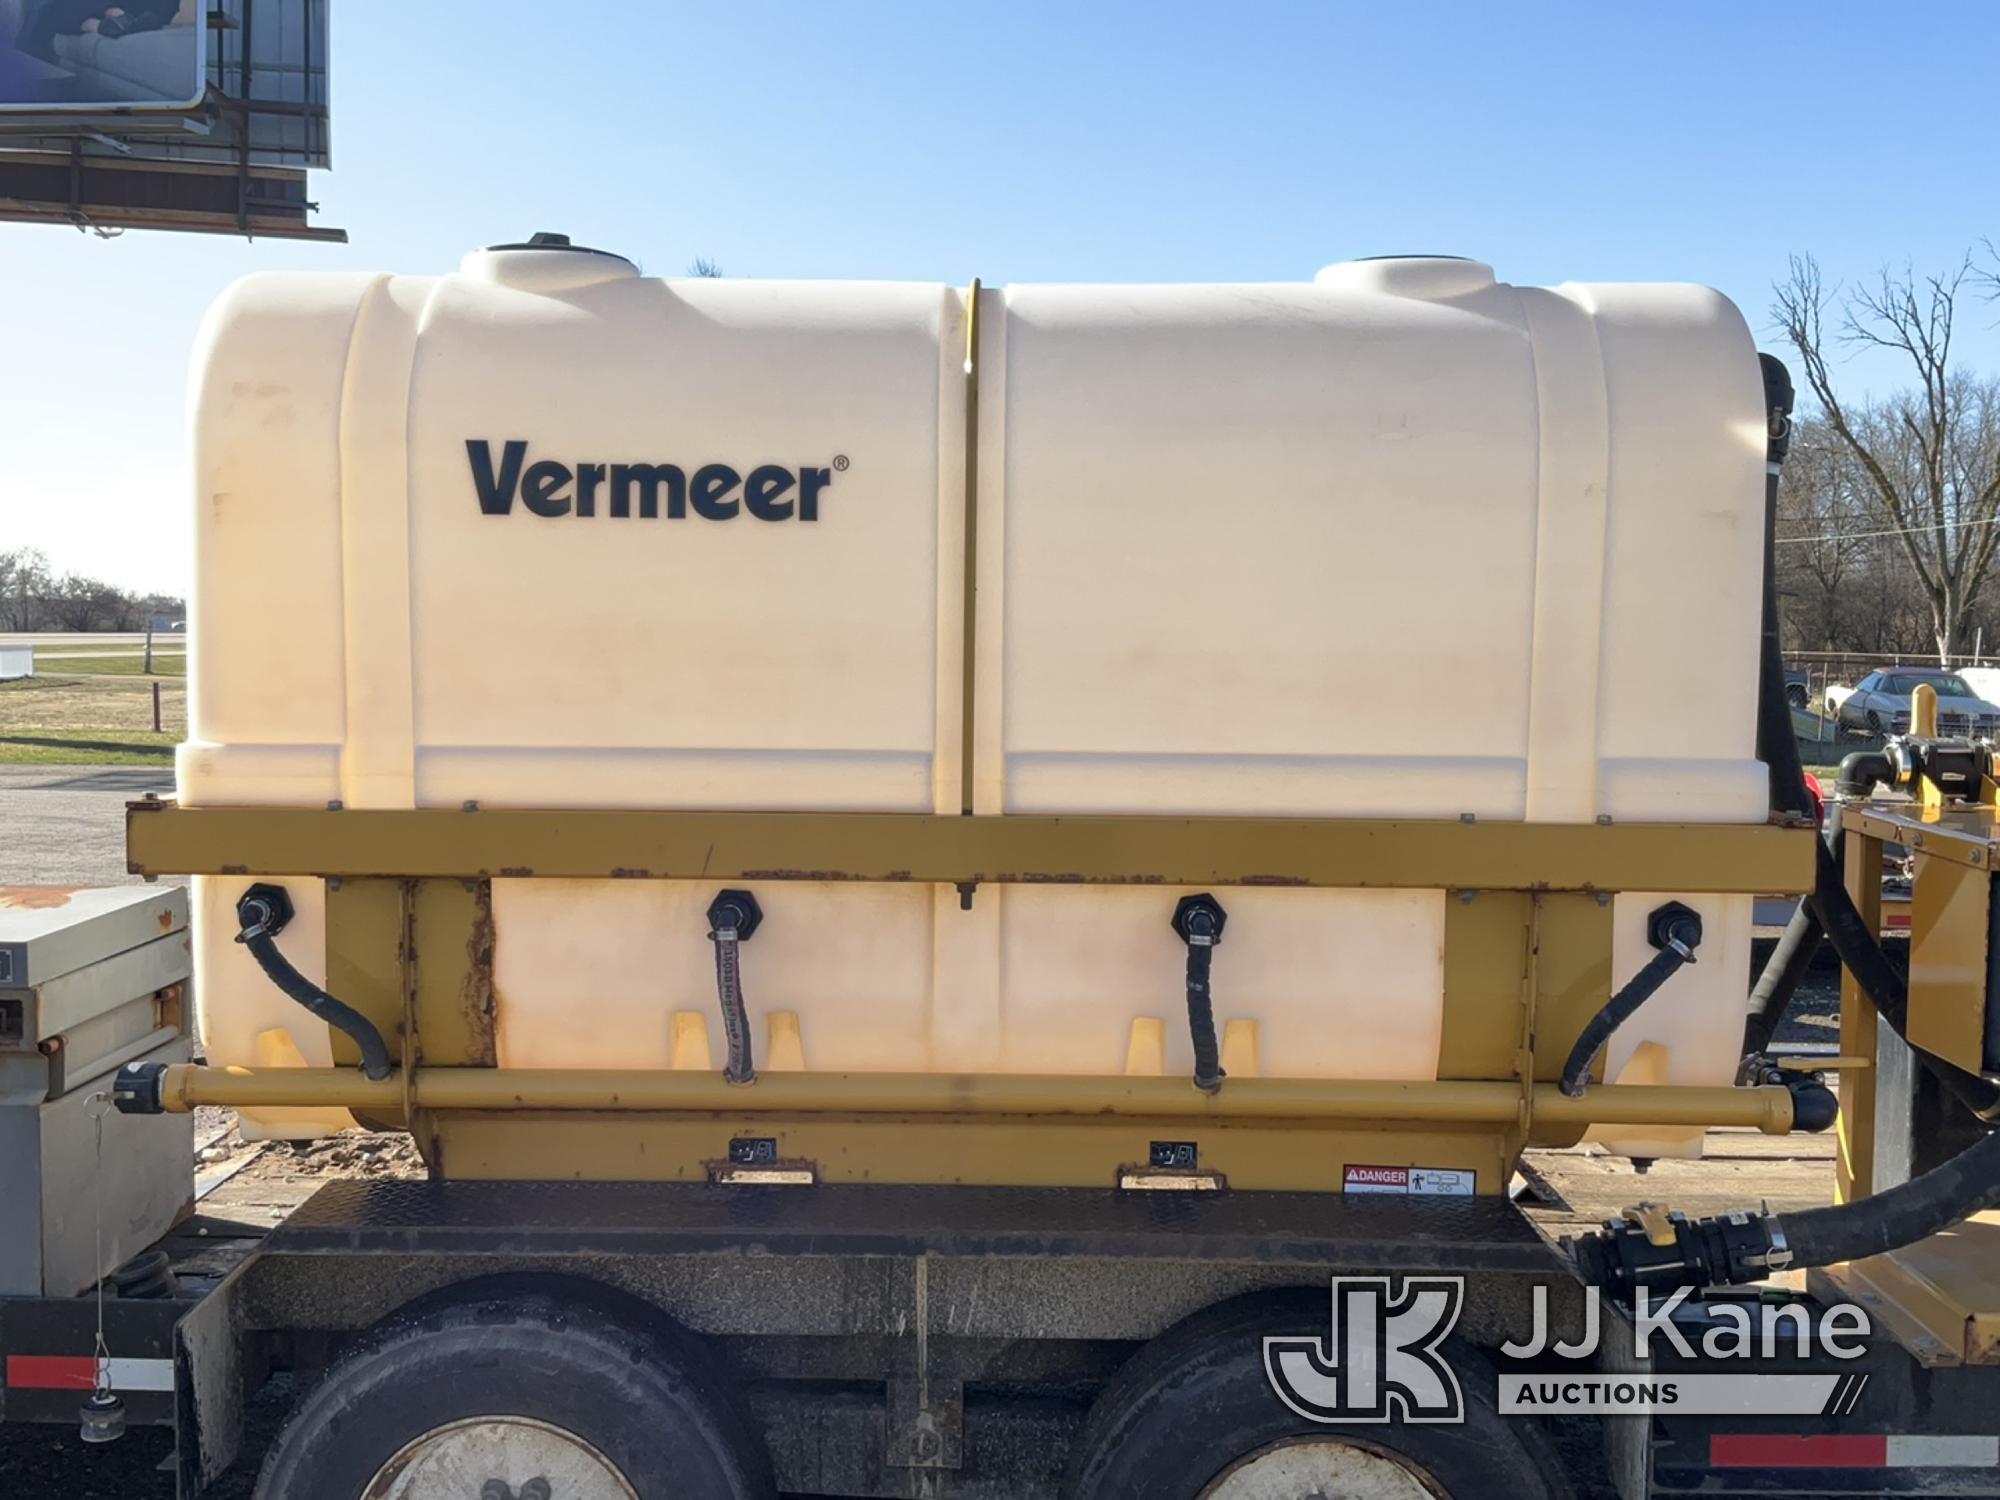 (South Beloit, IL) 2019 Vermeer D20x22 Series III Directional Boring Machine Runs, Moves & Operates